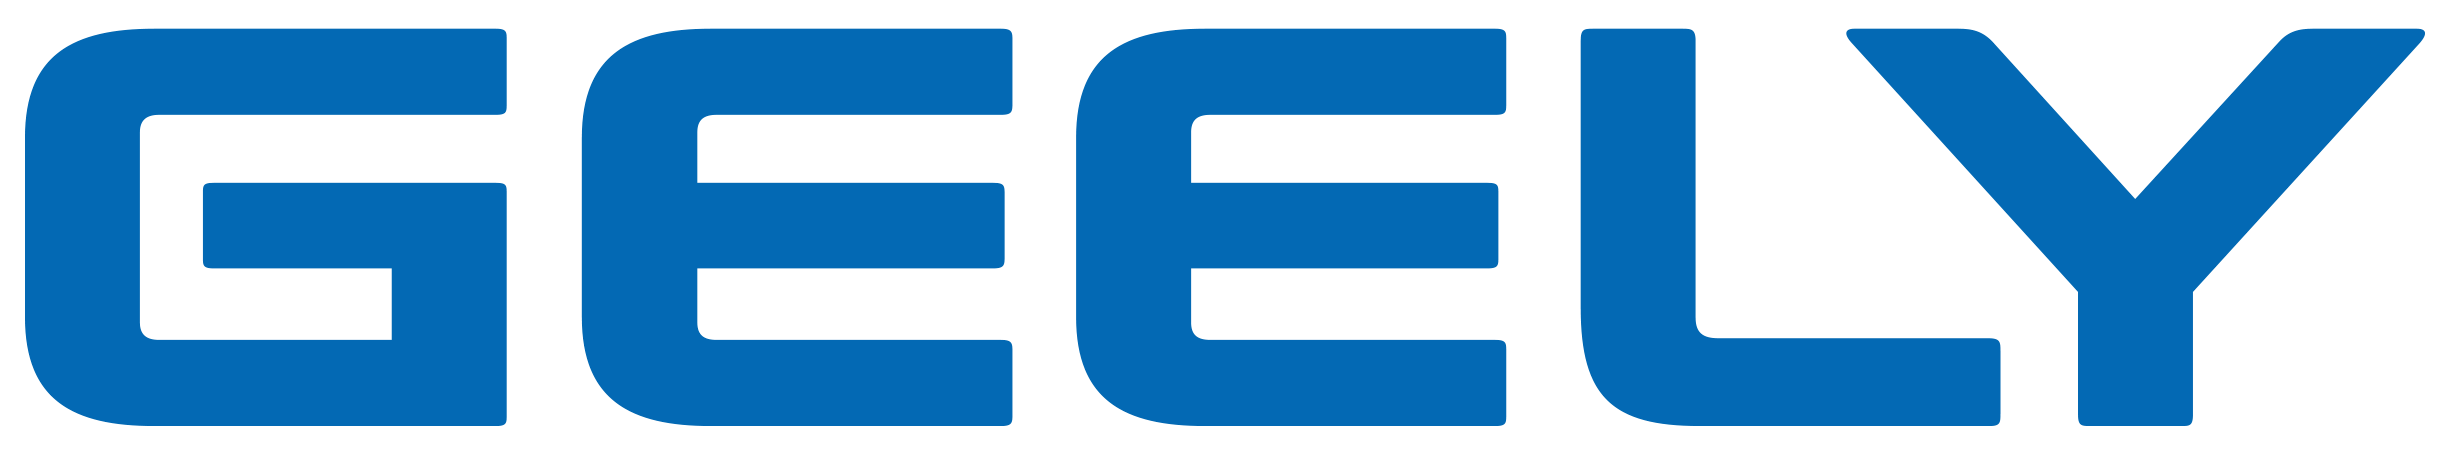 Geely Logo - Geely – Logos Download